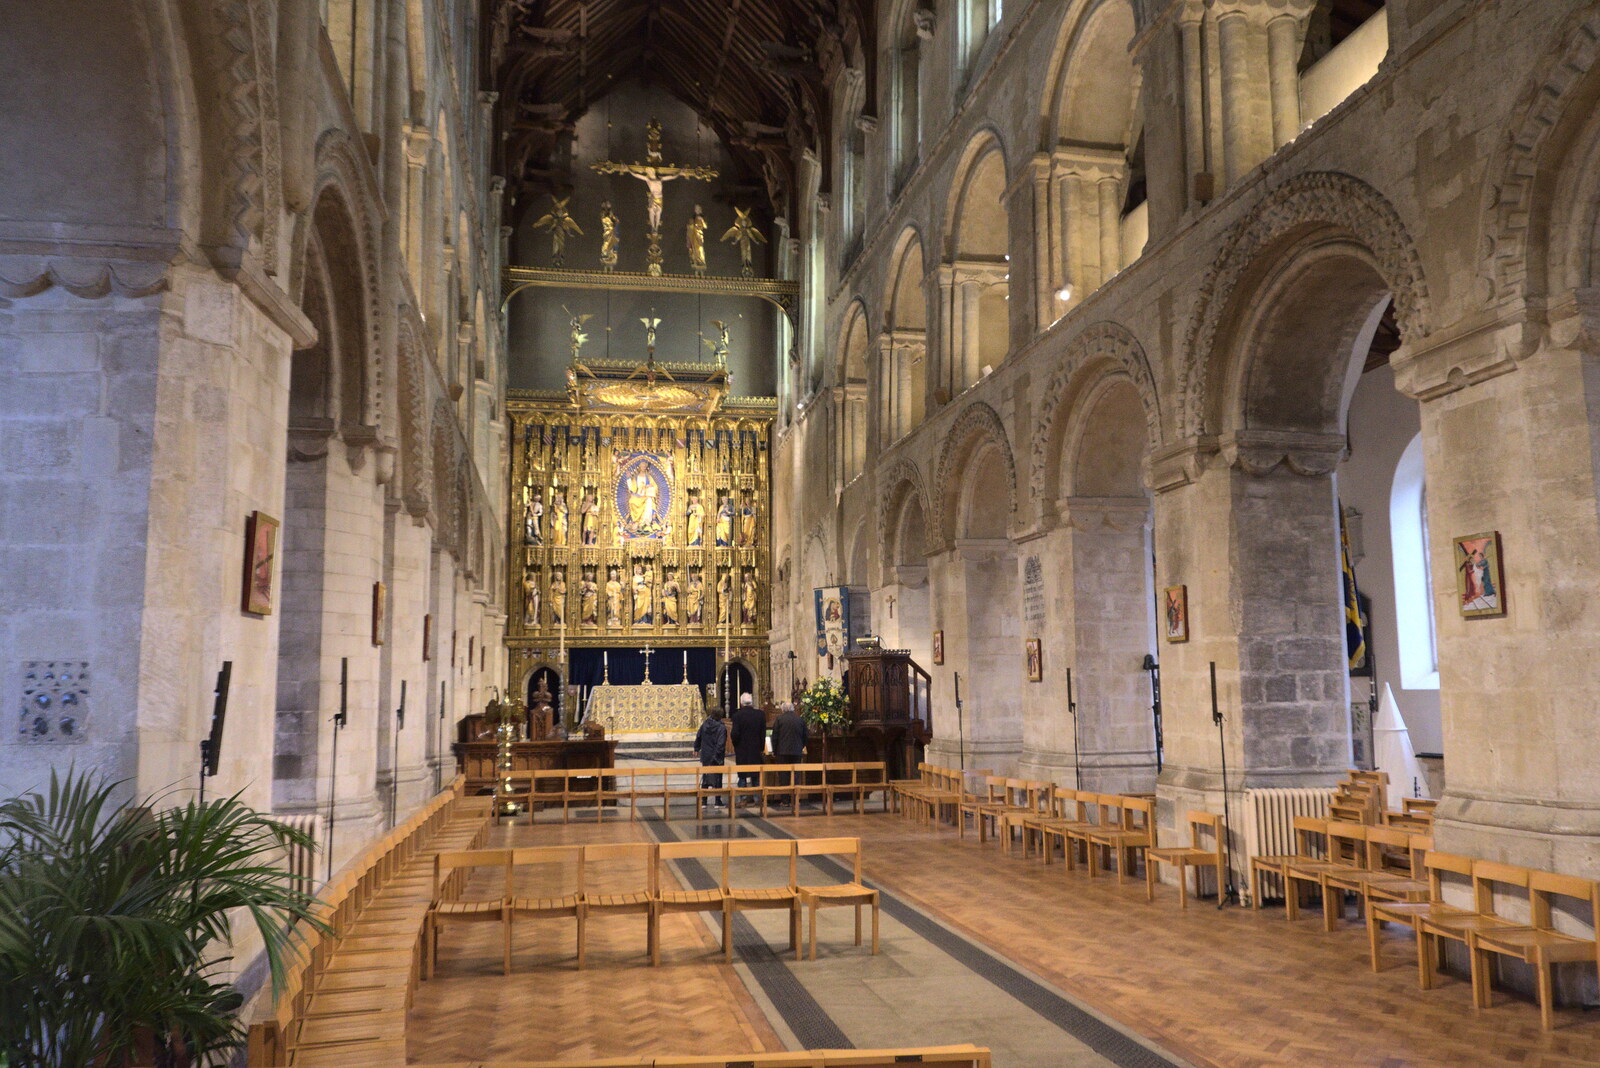 The Norman nave of the abbey from A Postcard from Wymondham, Norfolk - 26th January 2023